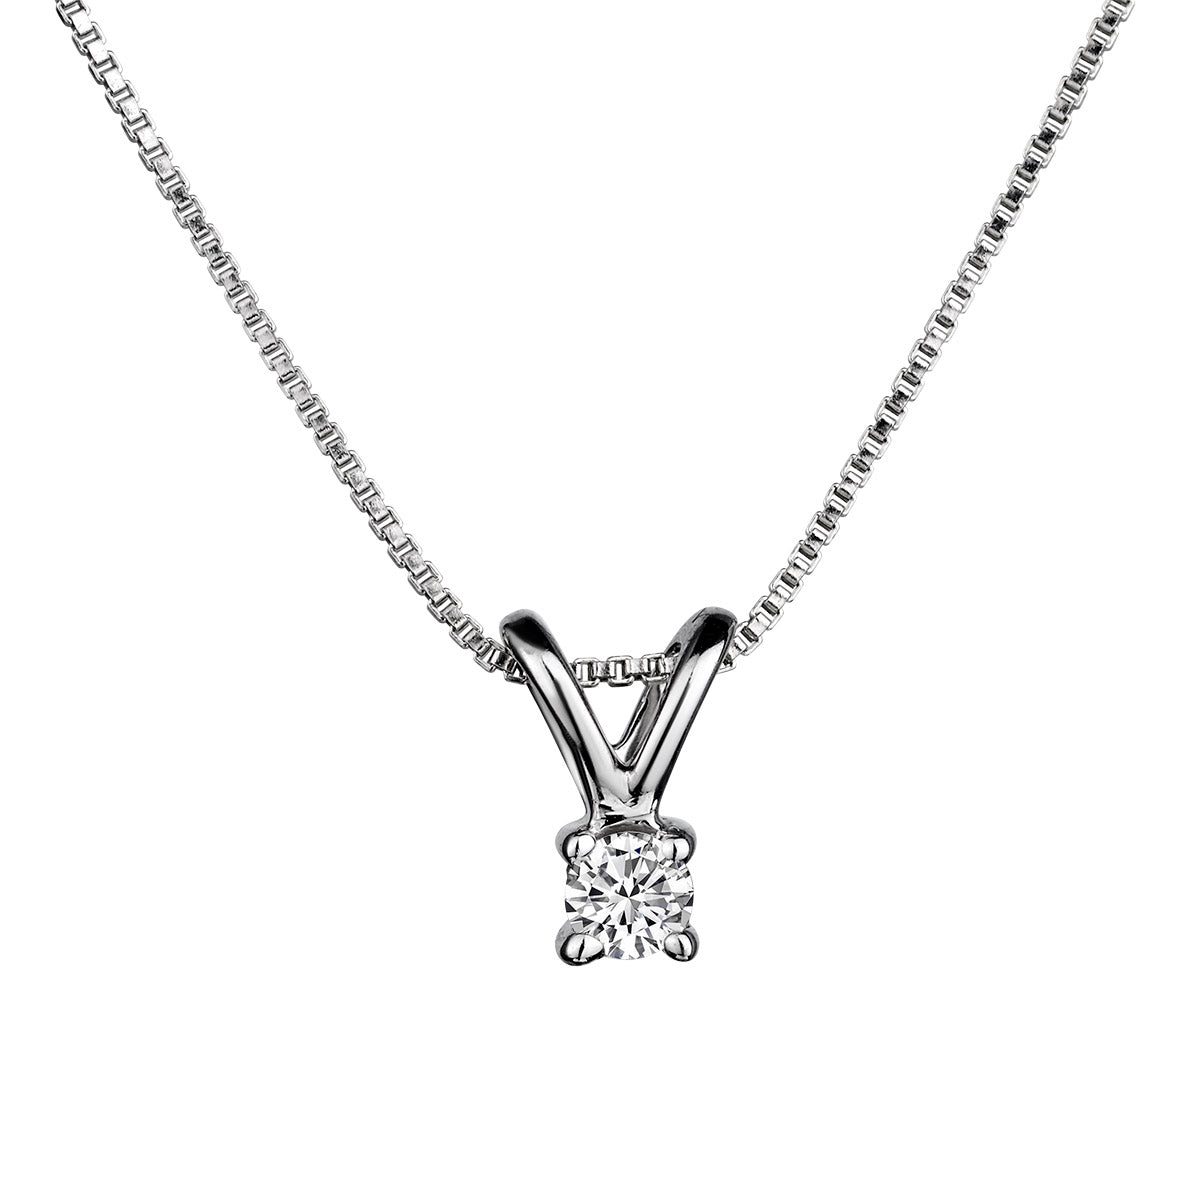 .10 Carat Diamond Pendant,  Sterling Silver.  Necklaces and Pendants. Griffin Jewellery Designs.